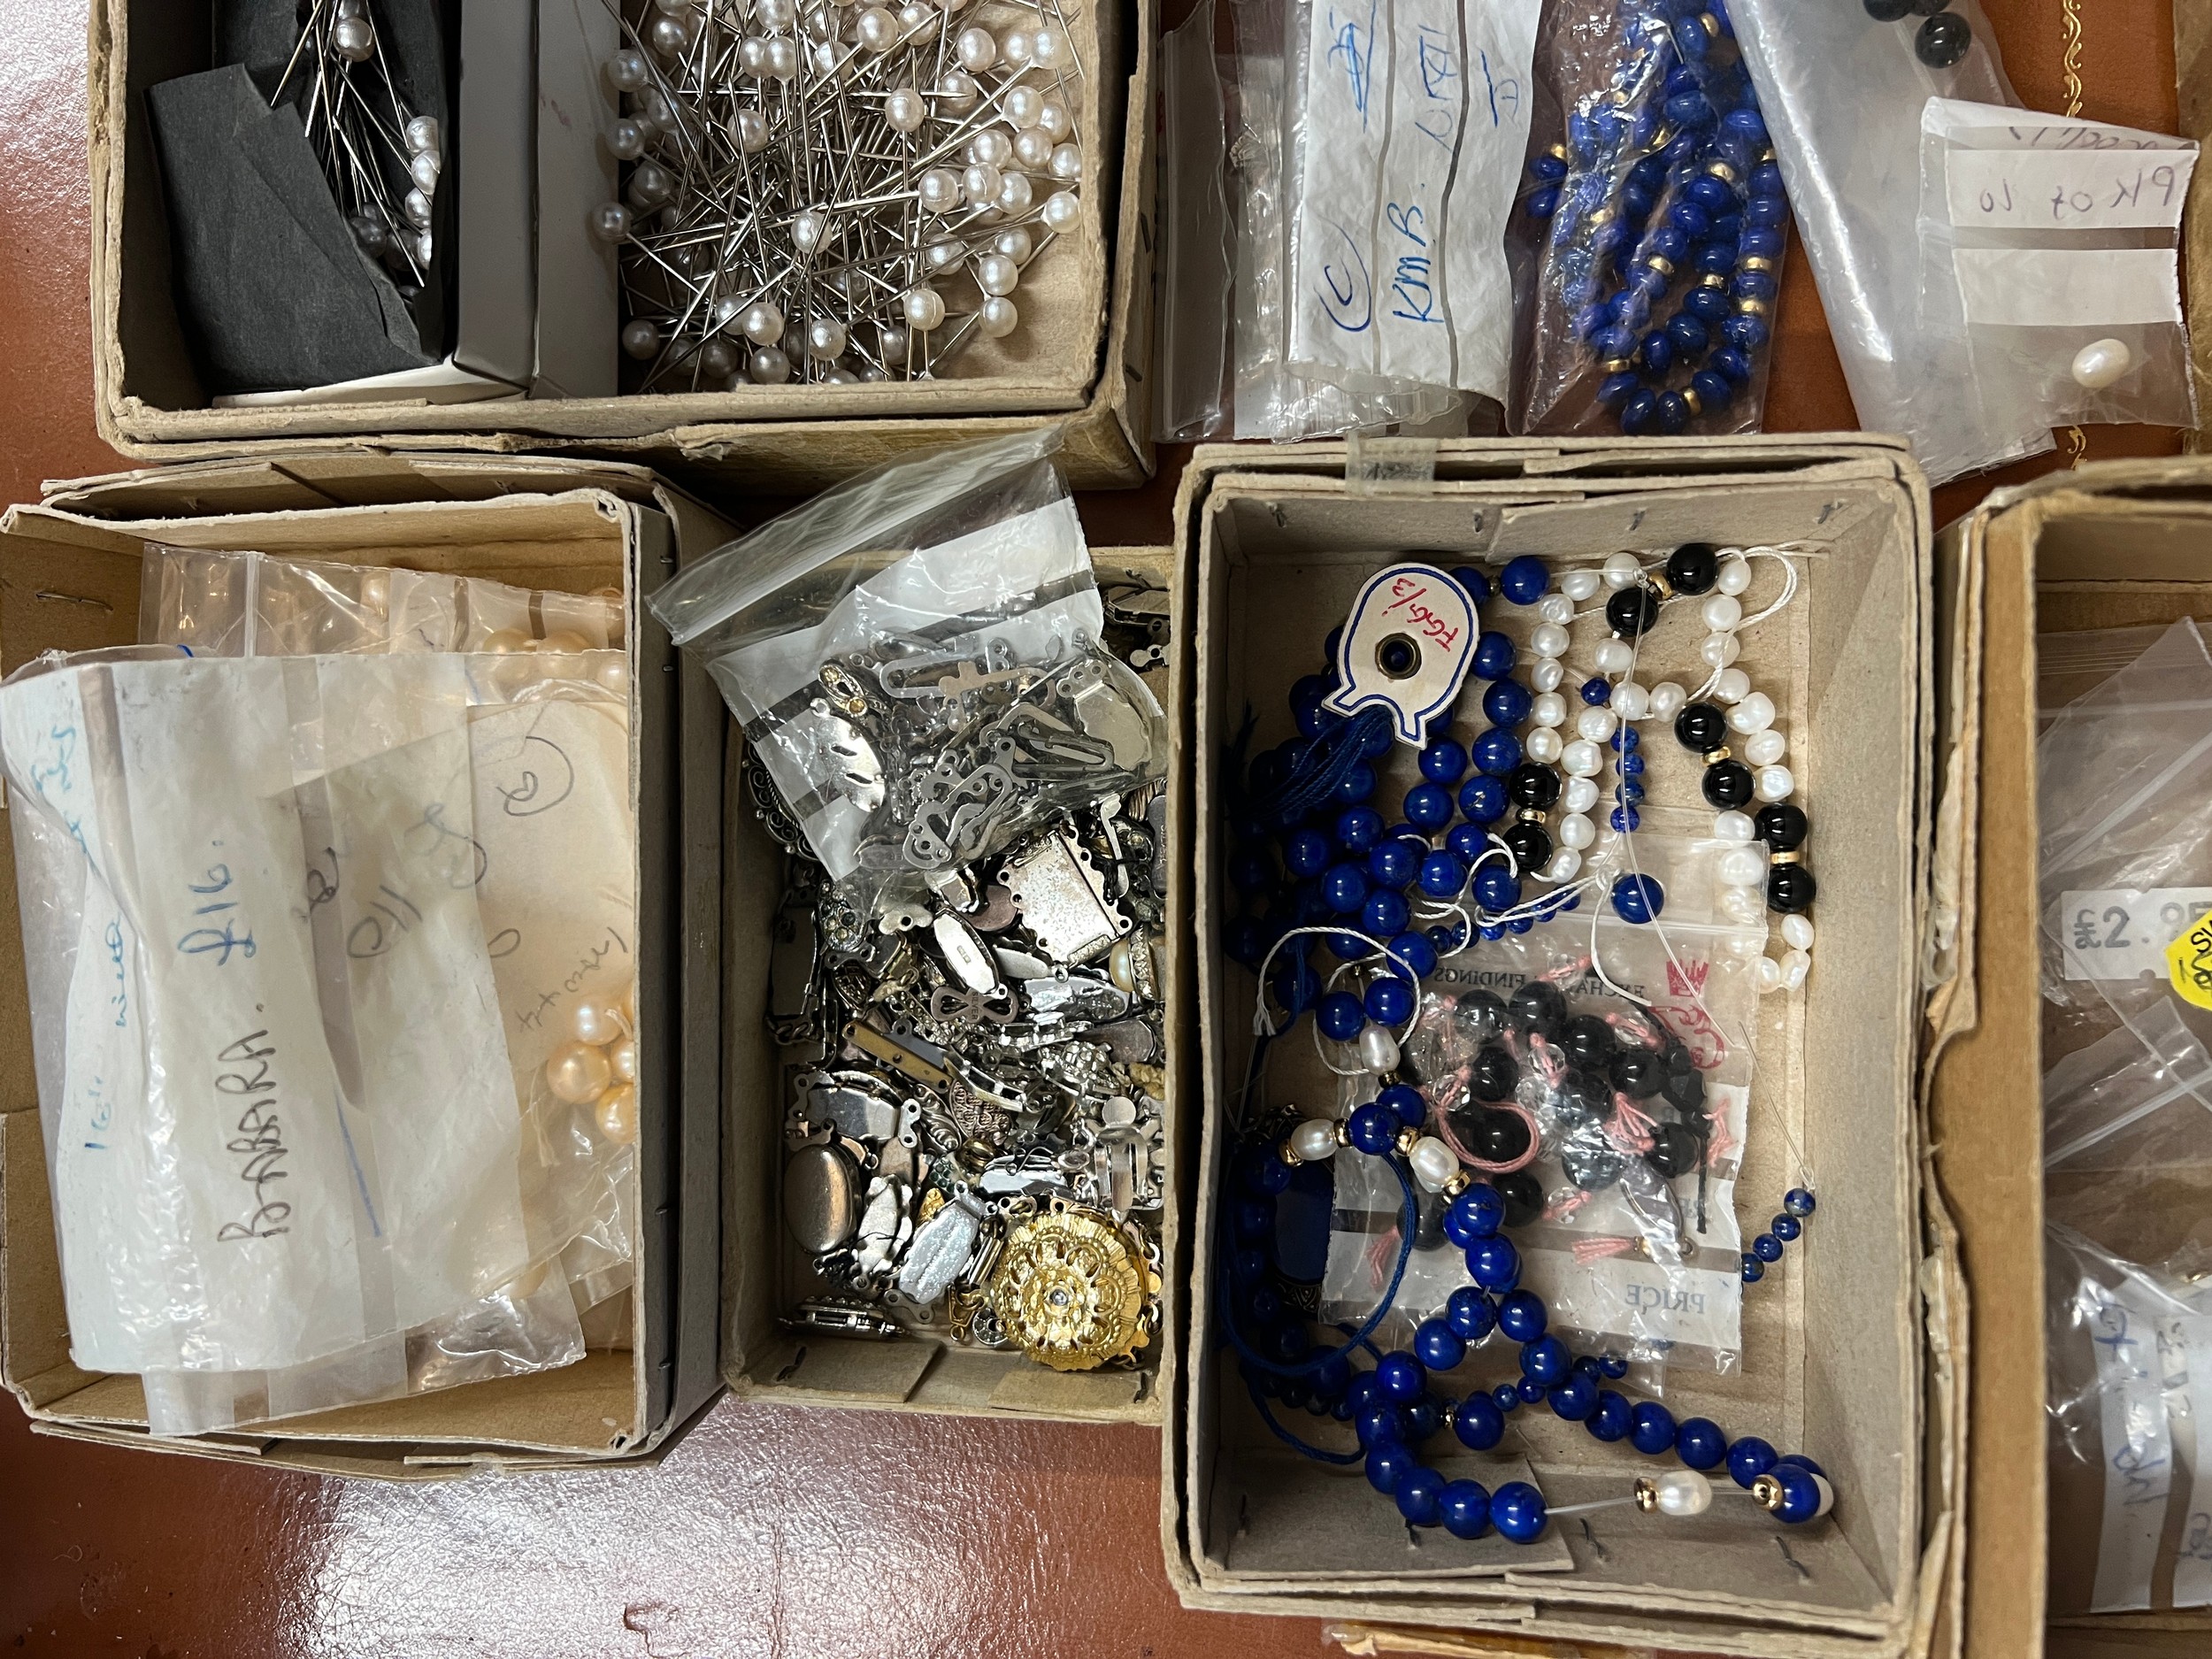 A quantity of jewellery fastenings, loose beads including lapis etc. - Image 2 of 5